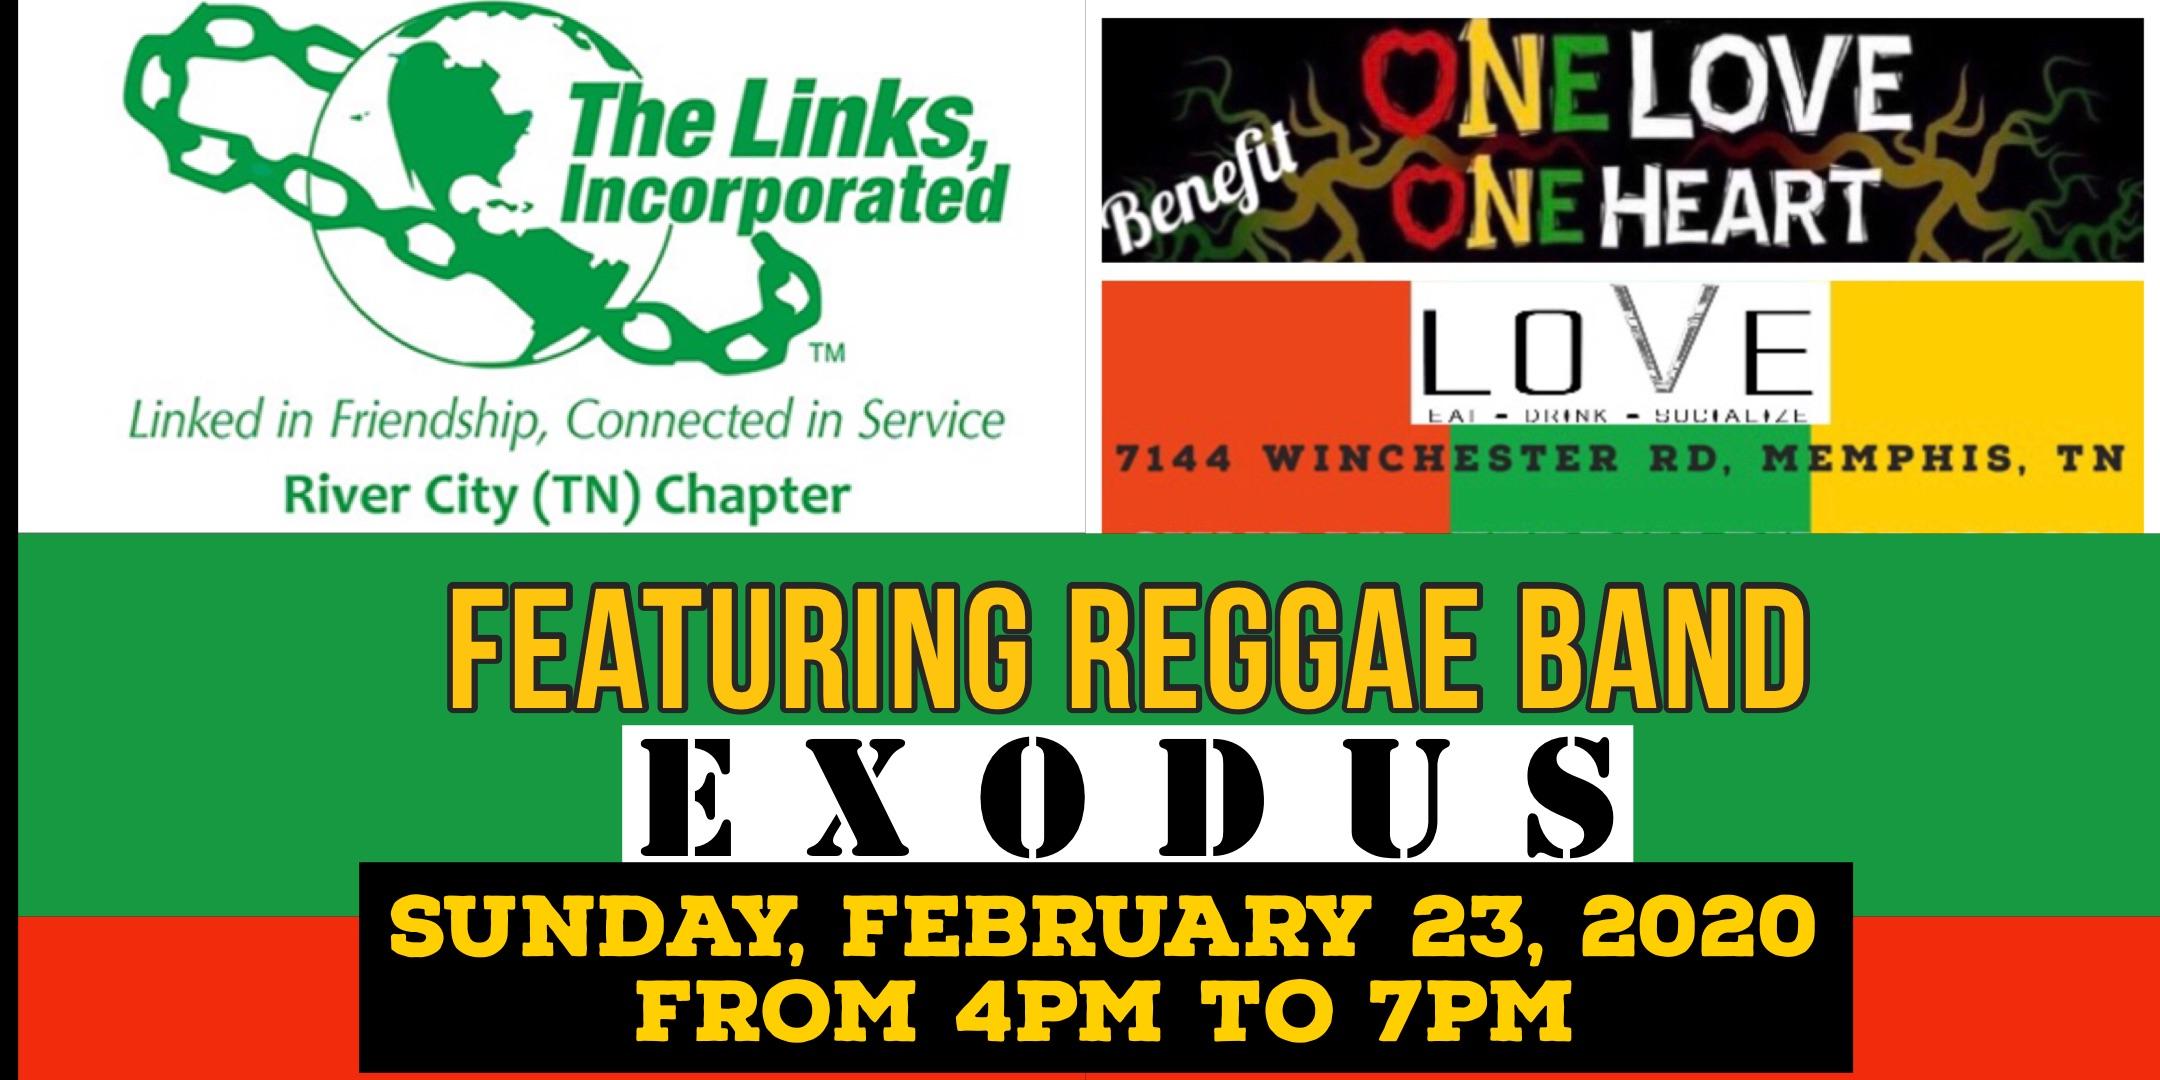 One Love, One Heart Reggae Benefit Concert presented by the River City Chapter of The Links, Incorporated